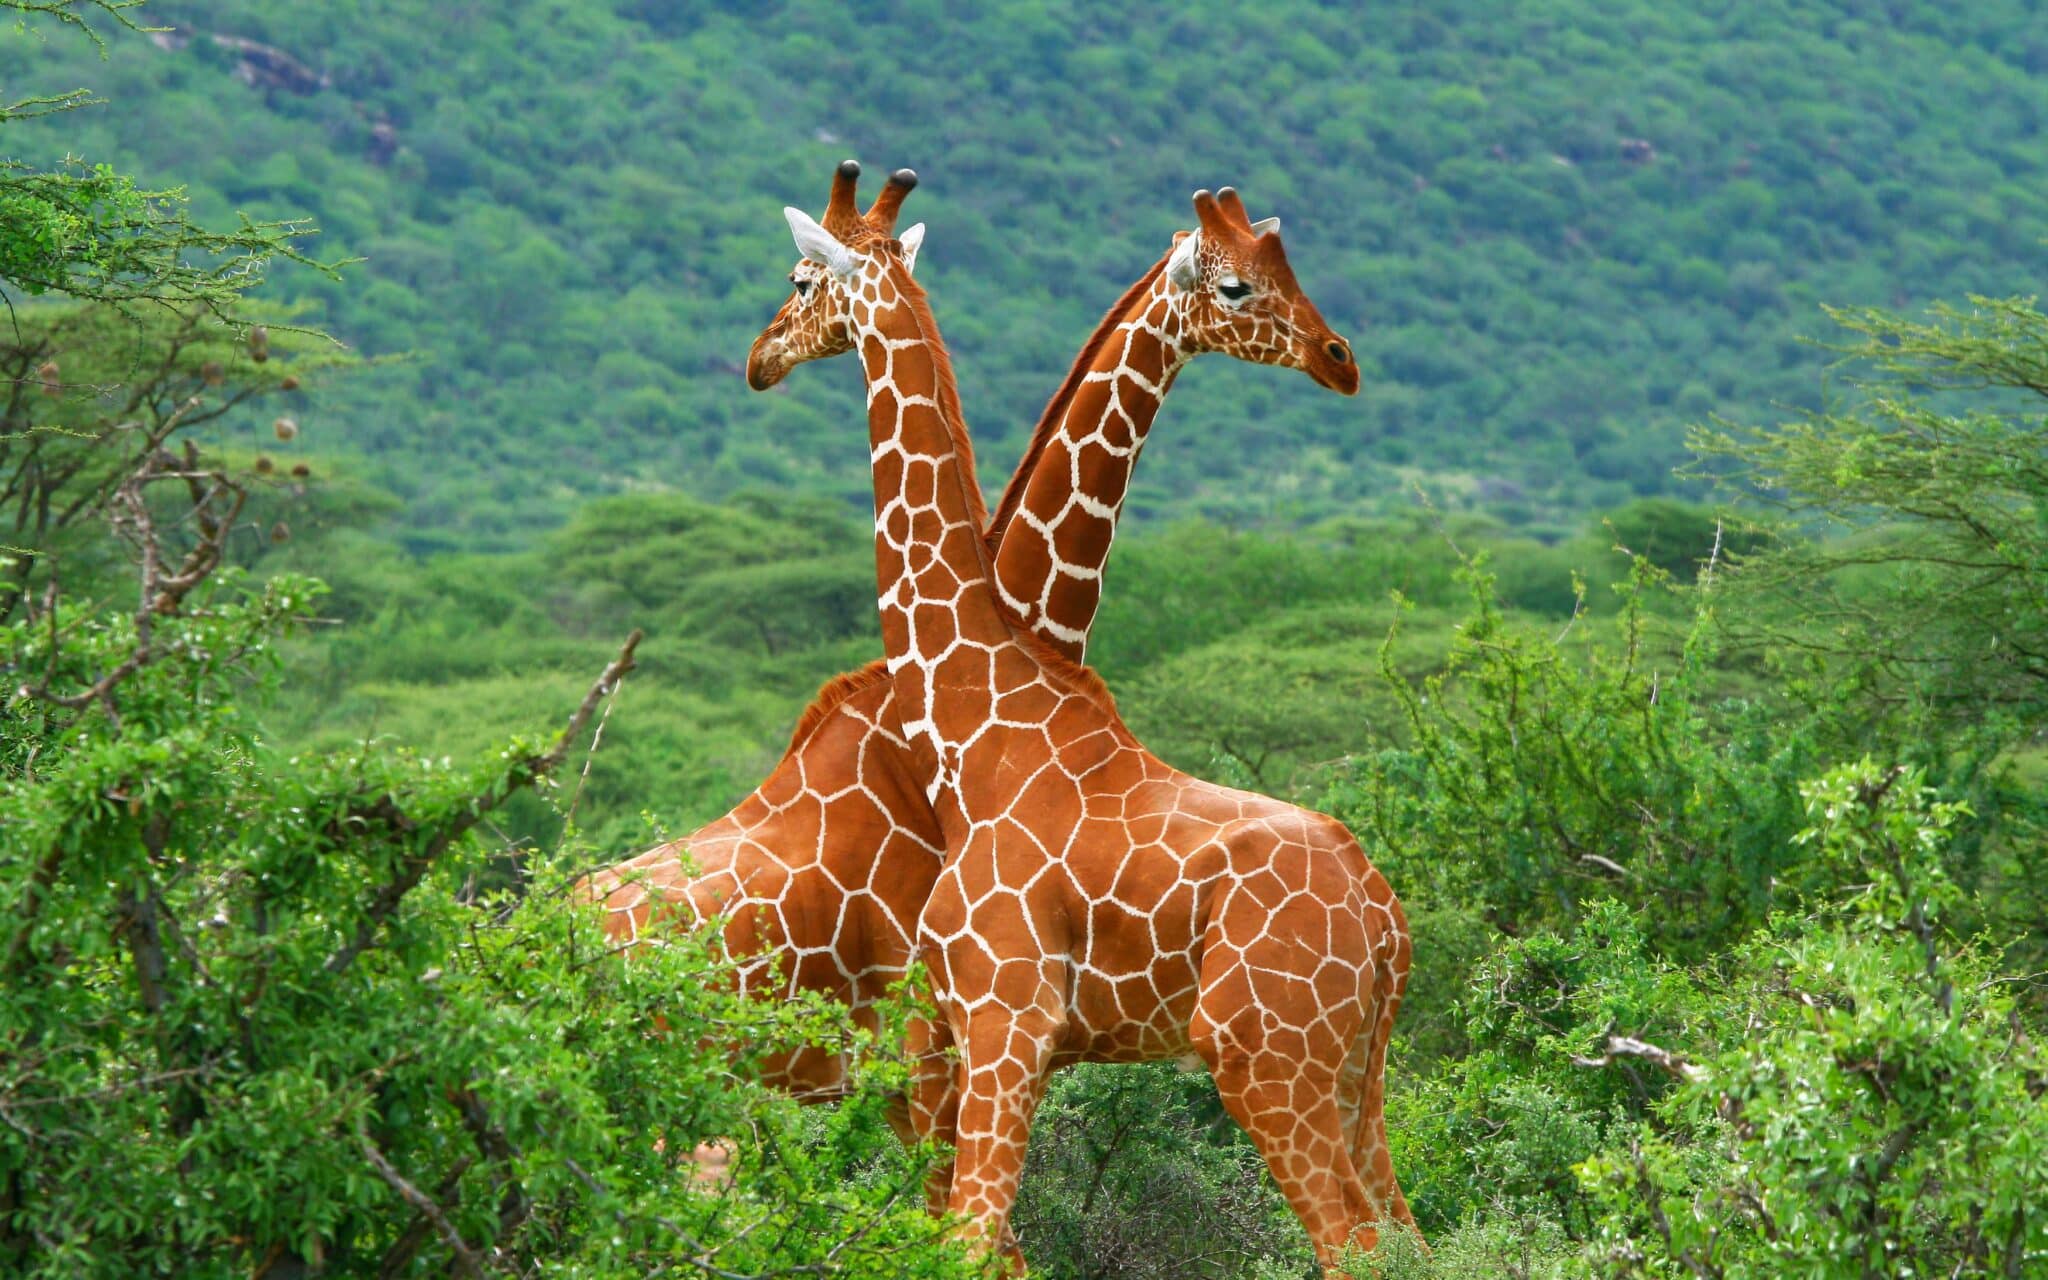 Amazing facts about Reticulated giraffes.